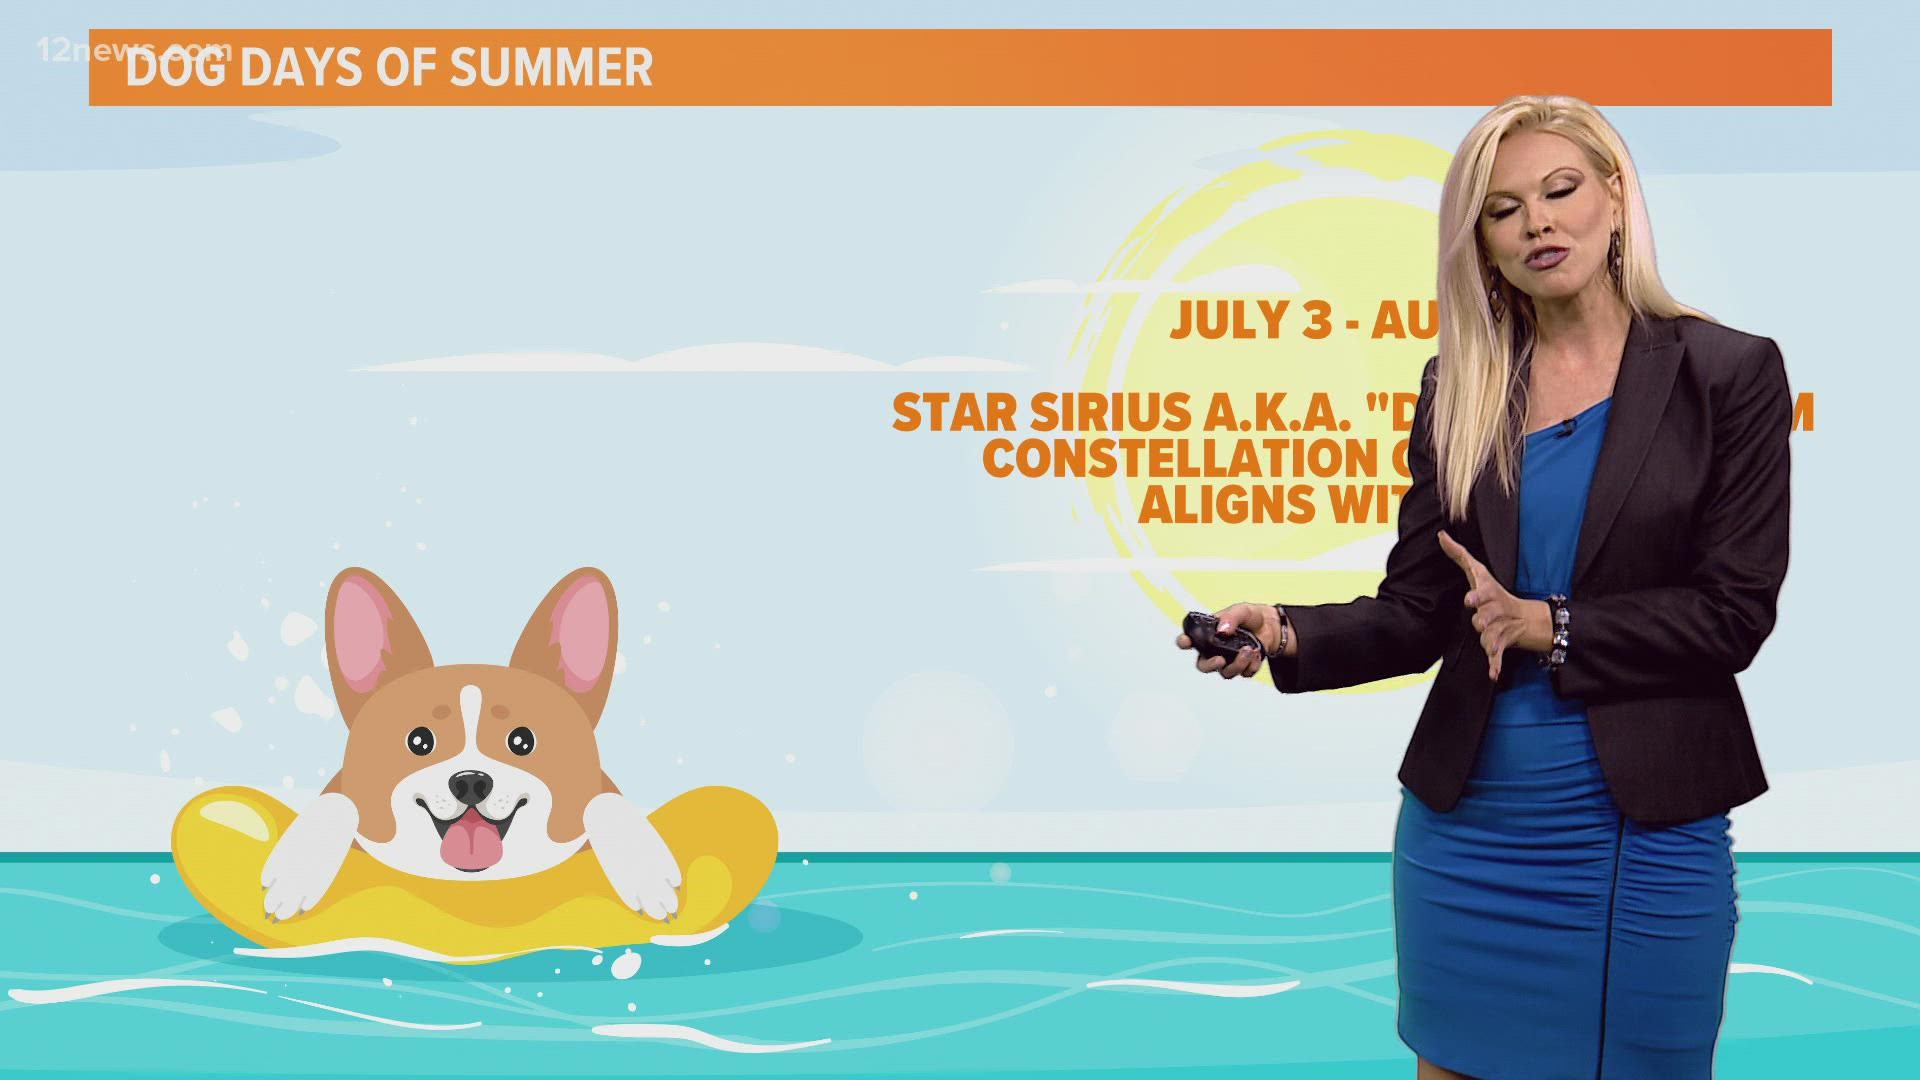 Team 12's Krystle Henderson explains the origin of the phrase "dog days of summer." She also talks about some star gazing tips during the month of August.